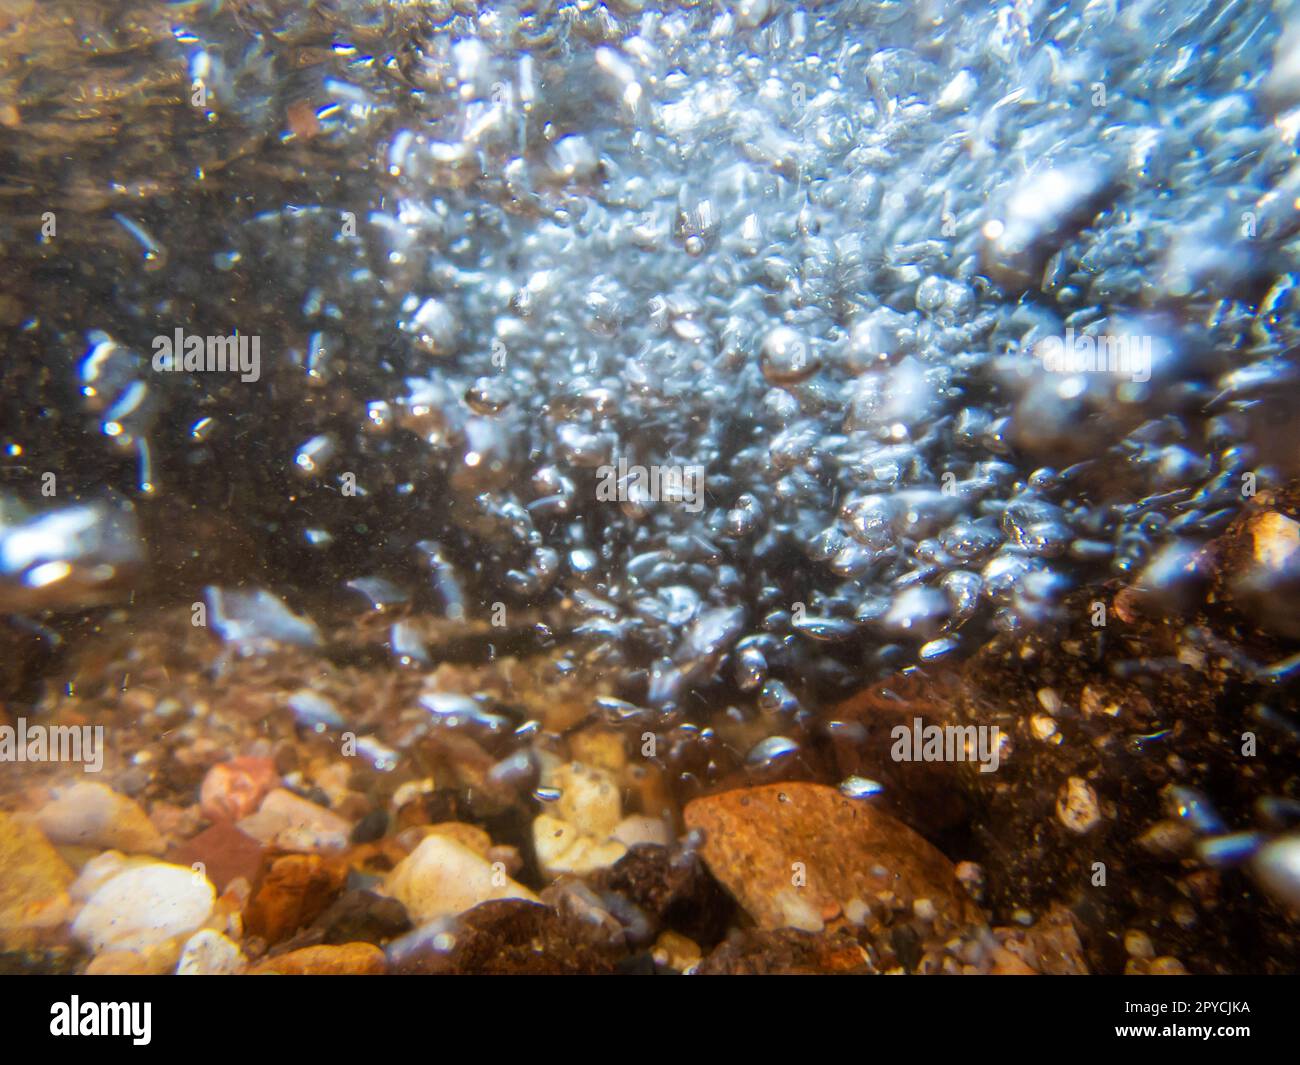 Underwater abstract image of a bubbles in stream with colorful stones Stock Photo